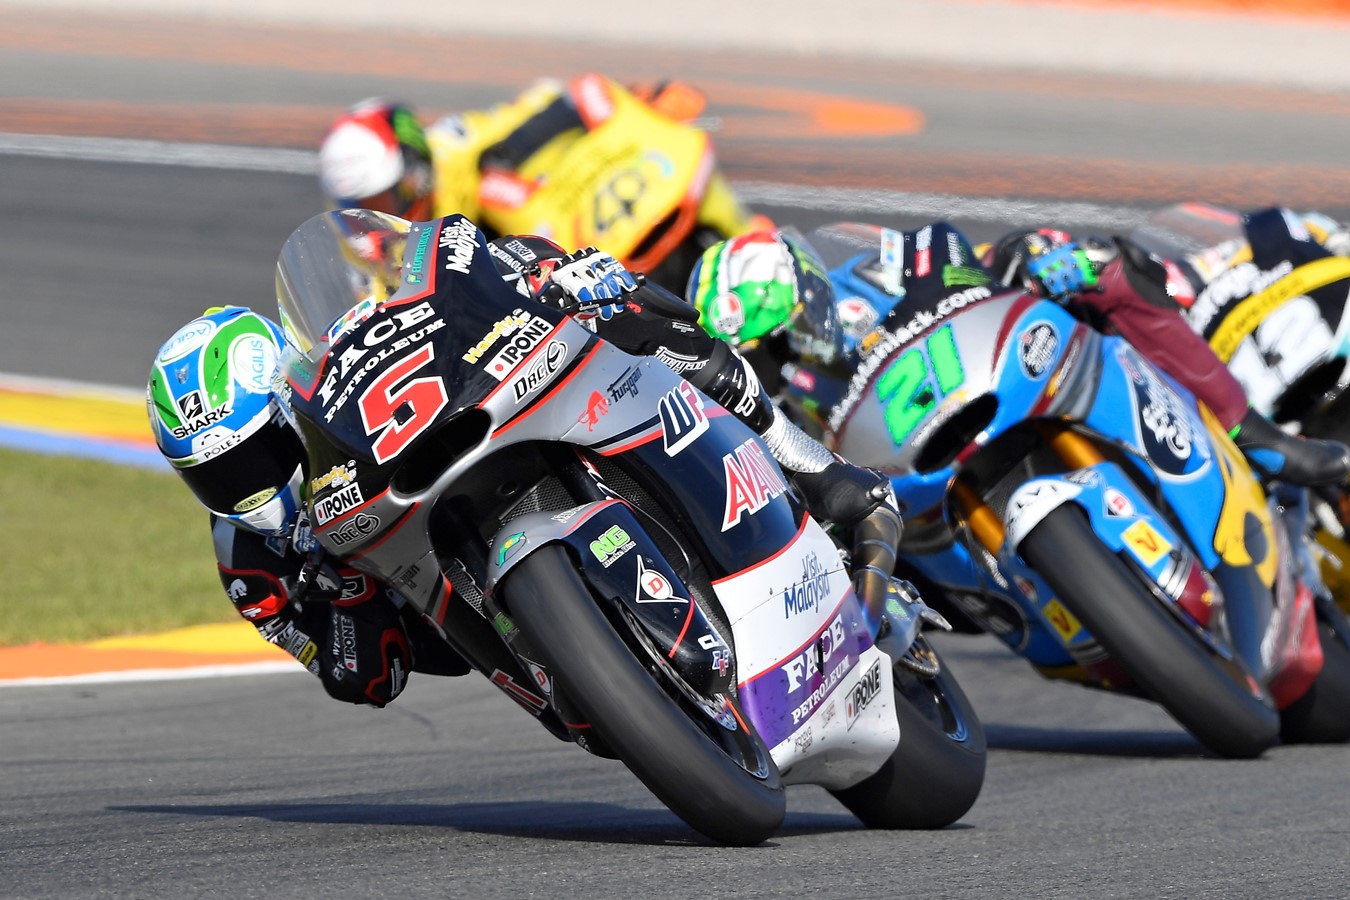 Zarco completed his two seasons of domination with a final victory in Moto2